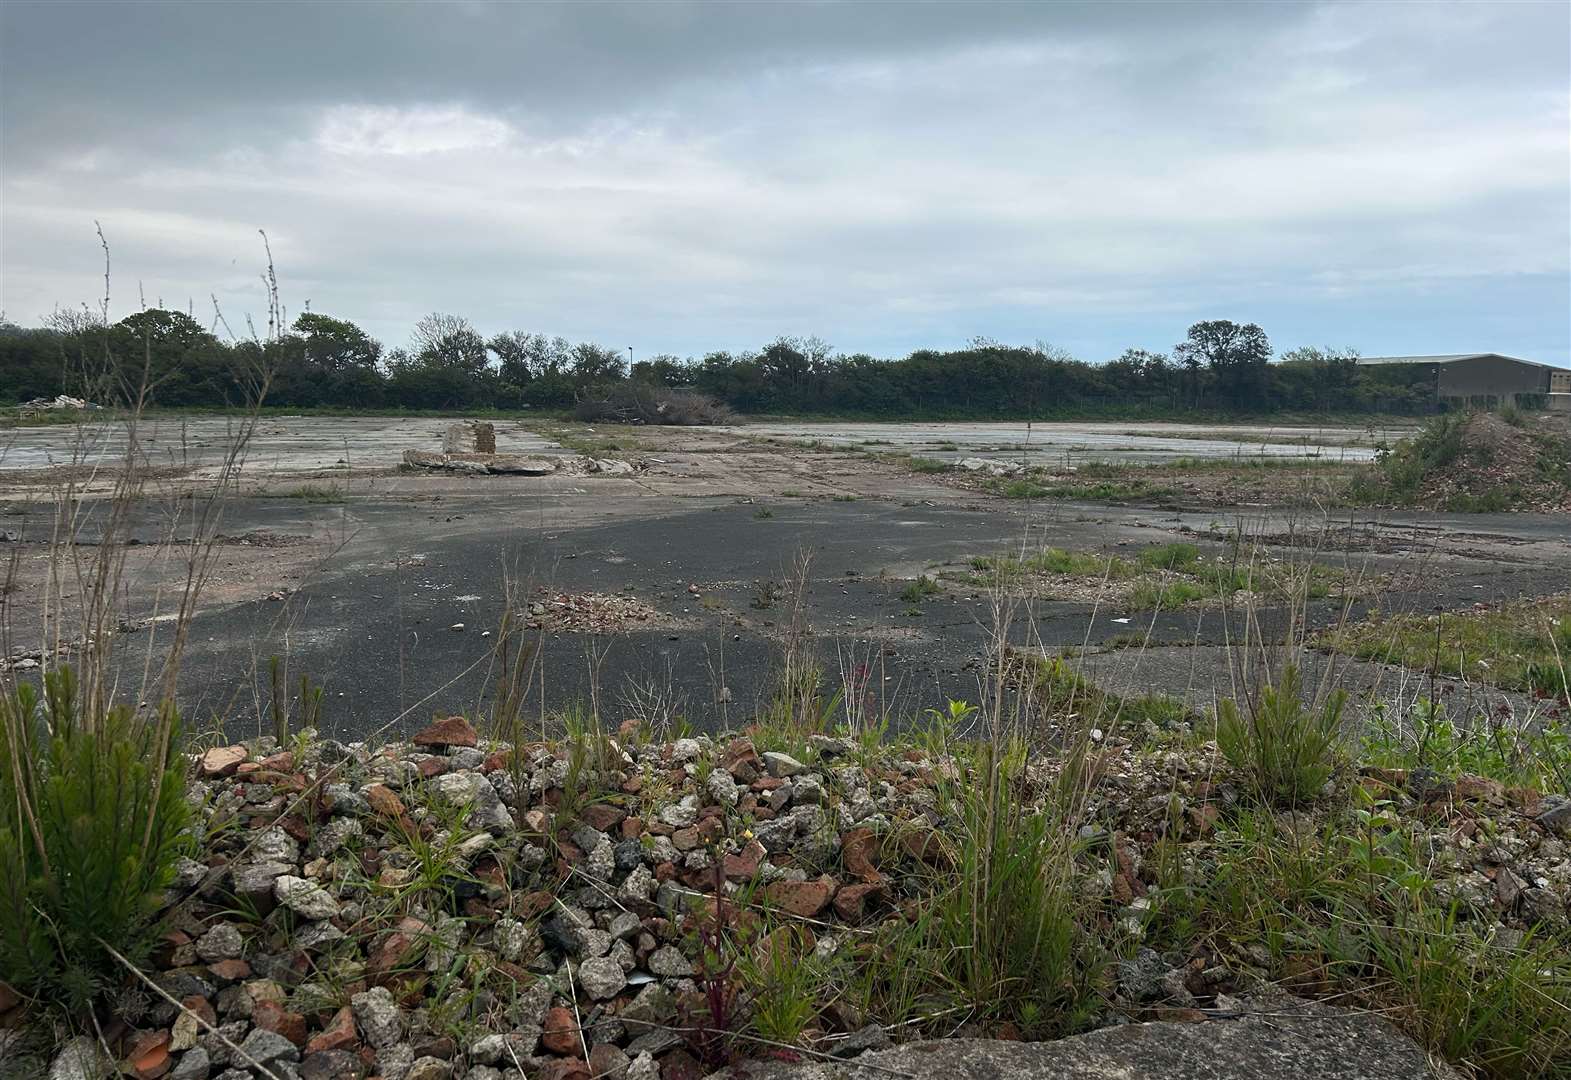 The site has been empty since 2019 and has become a hotspot for anti-social behaviour